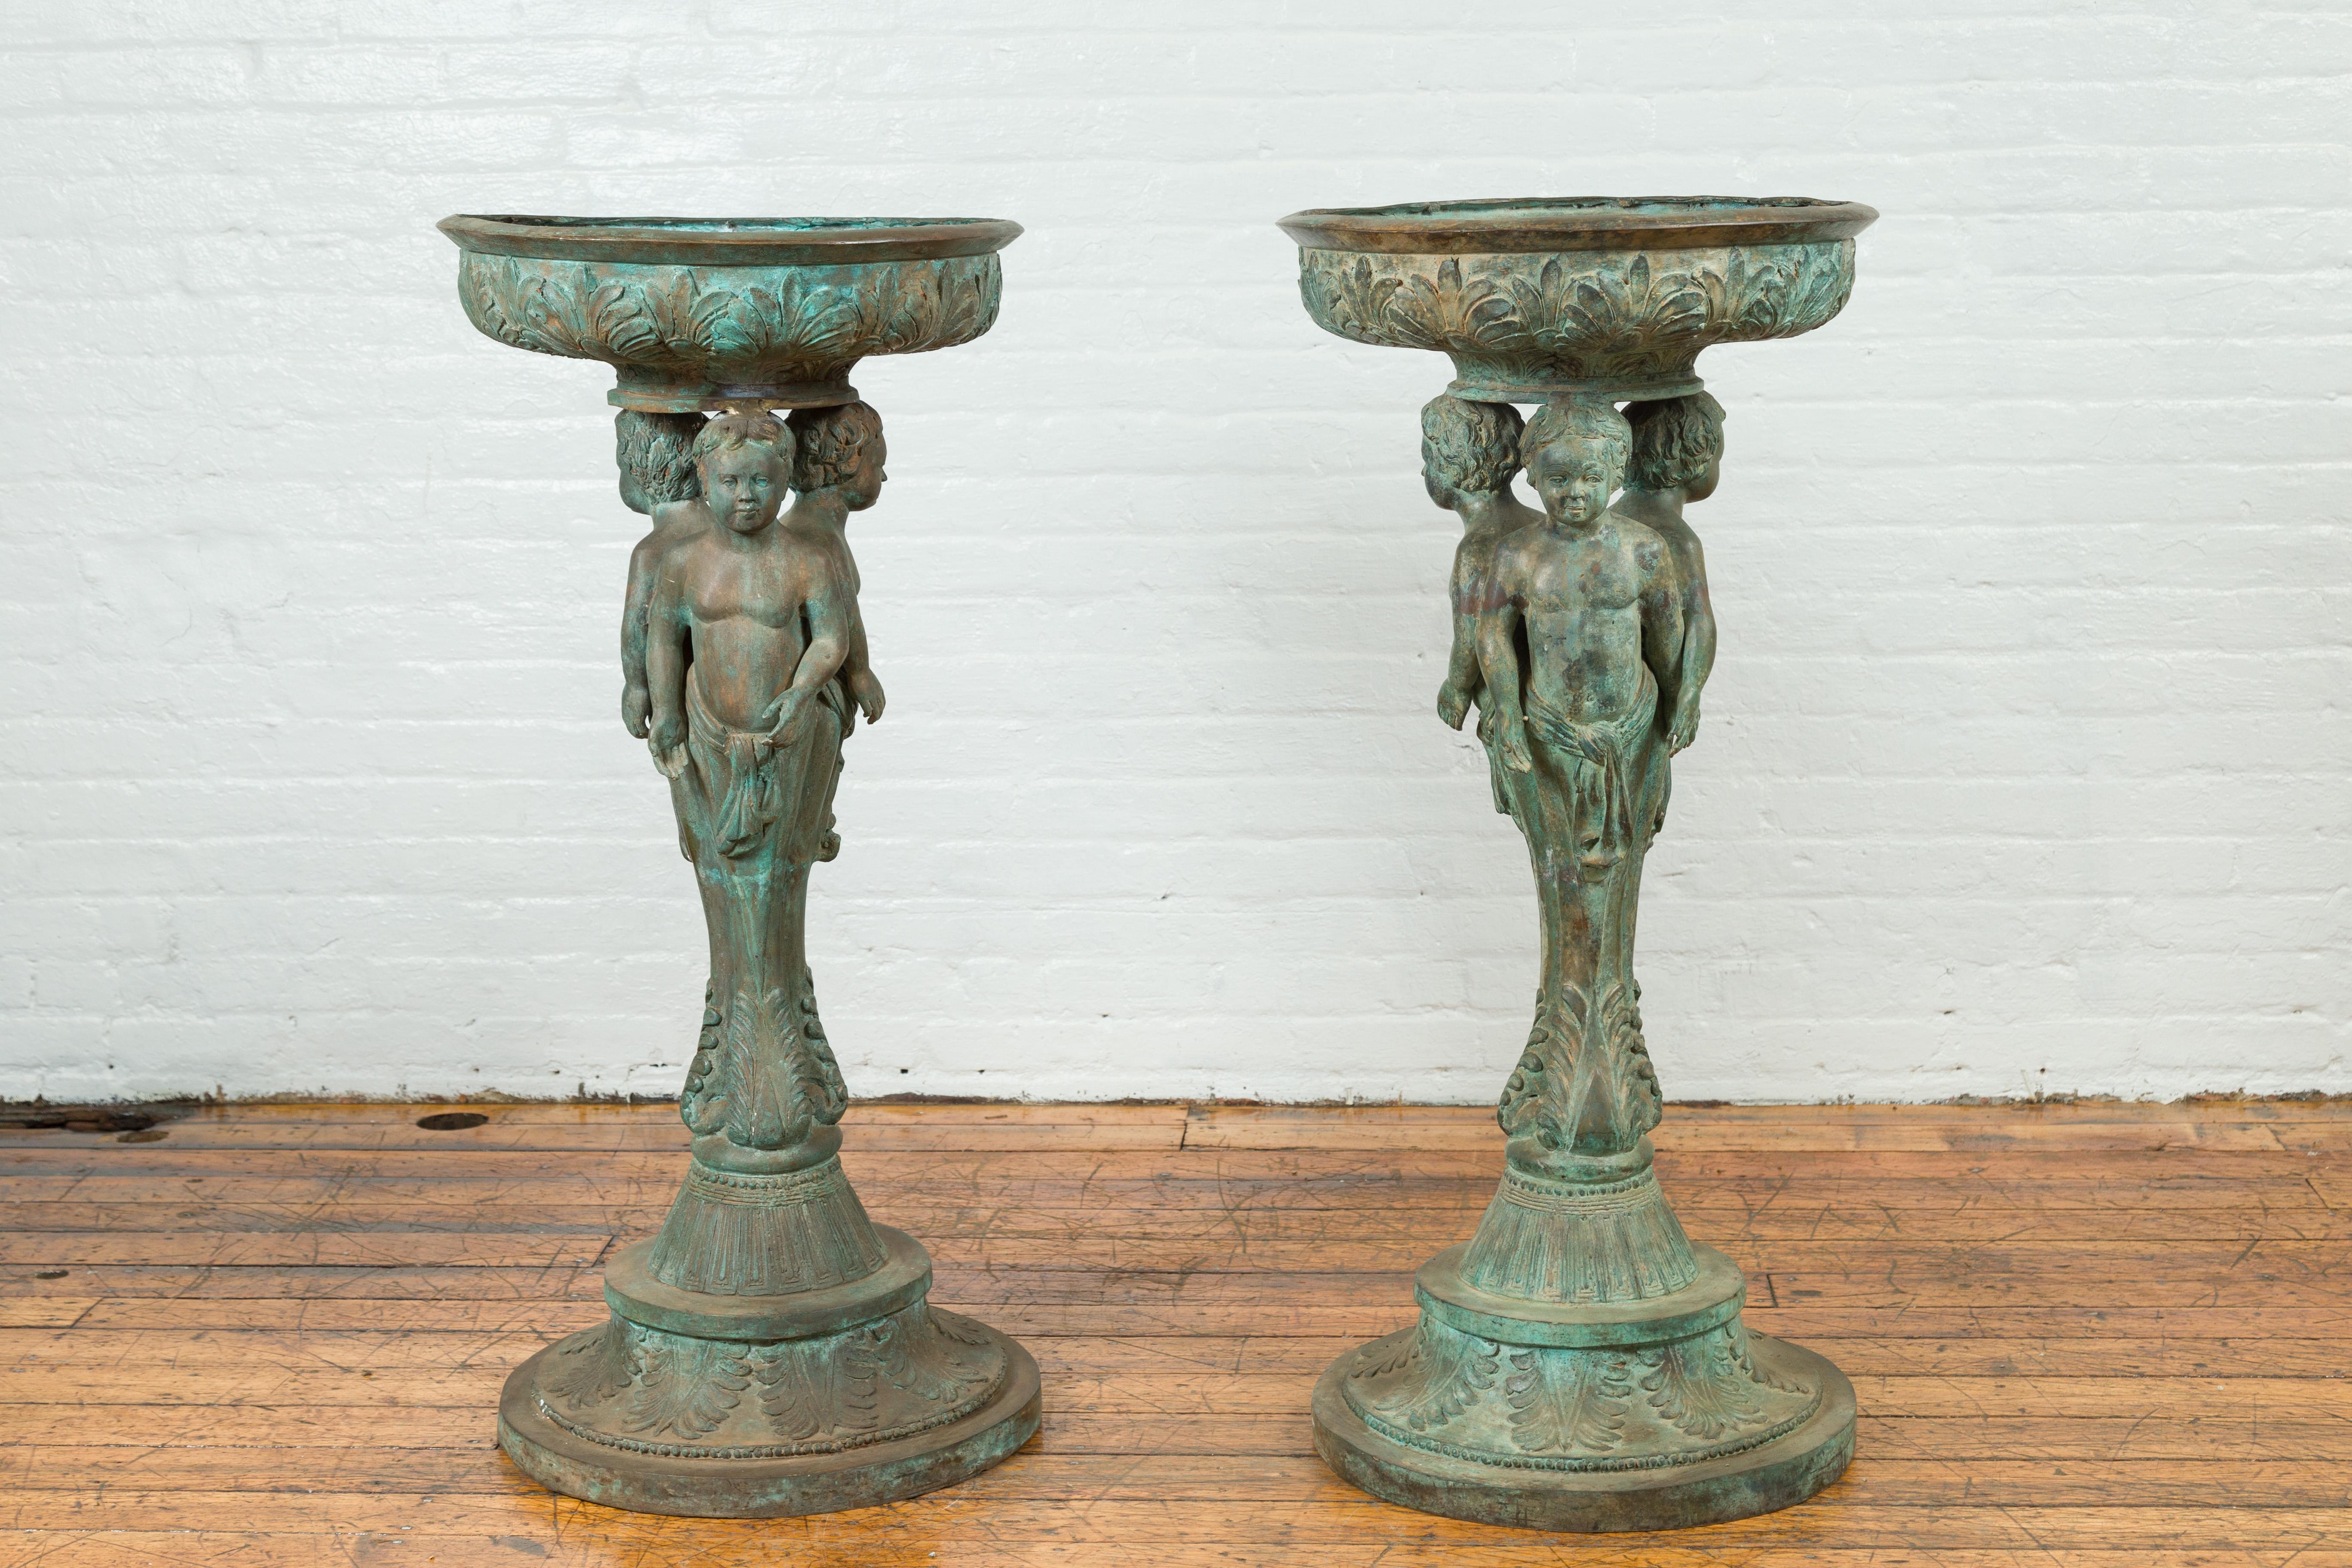 A Classical bronze triple cherub planter urn from the 20th century with verdigris patina. This captivating bronze lost-wax classical planter urn from the 20th century is a masterful blend of artistry and utility. The base of the urn is formed by